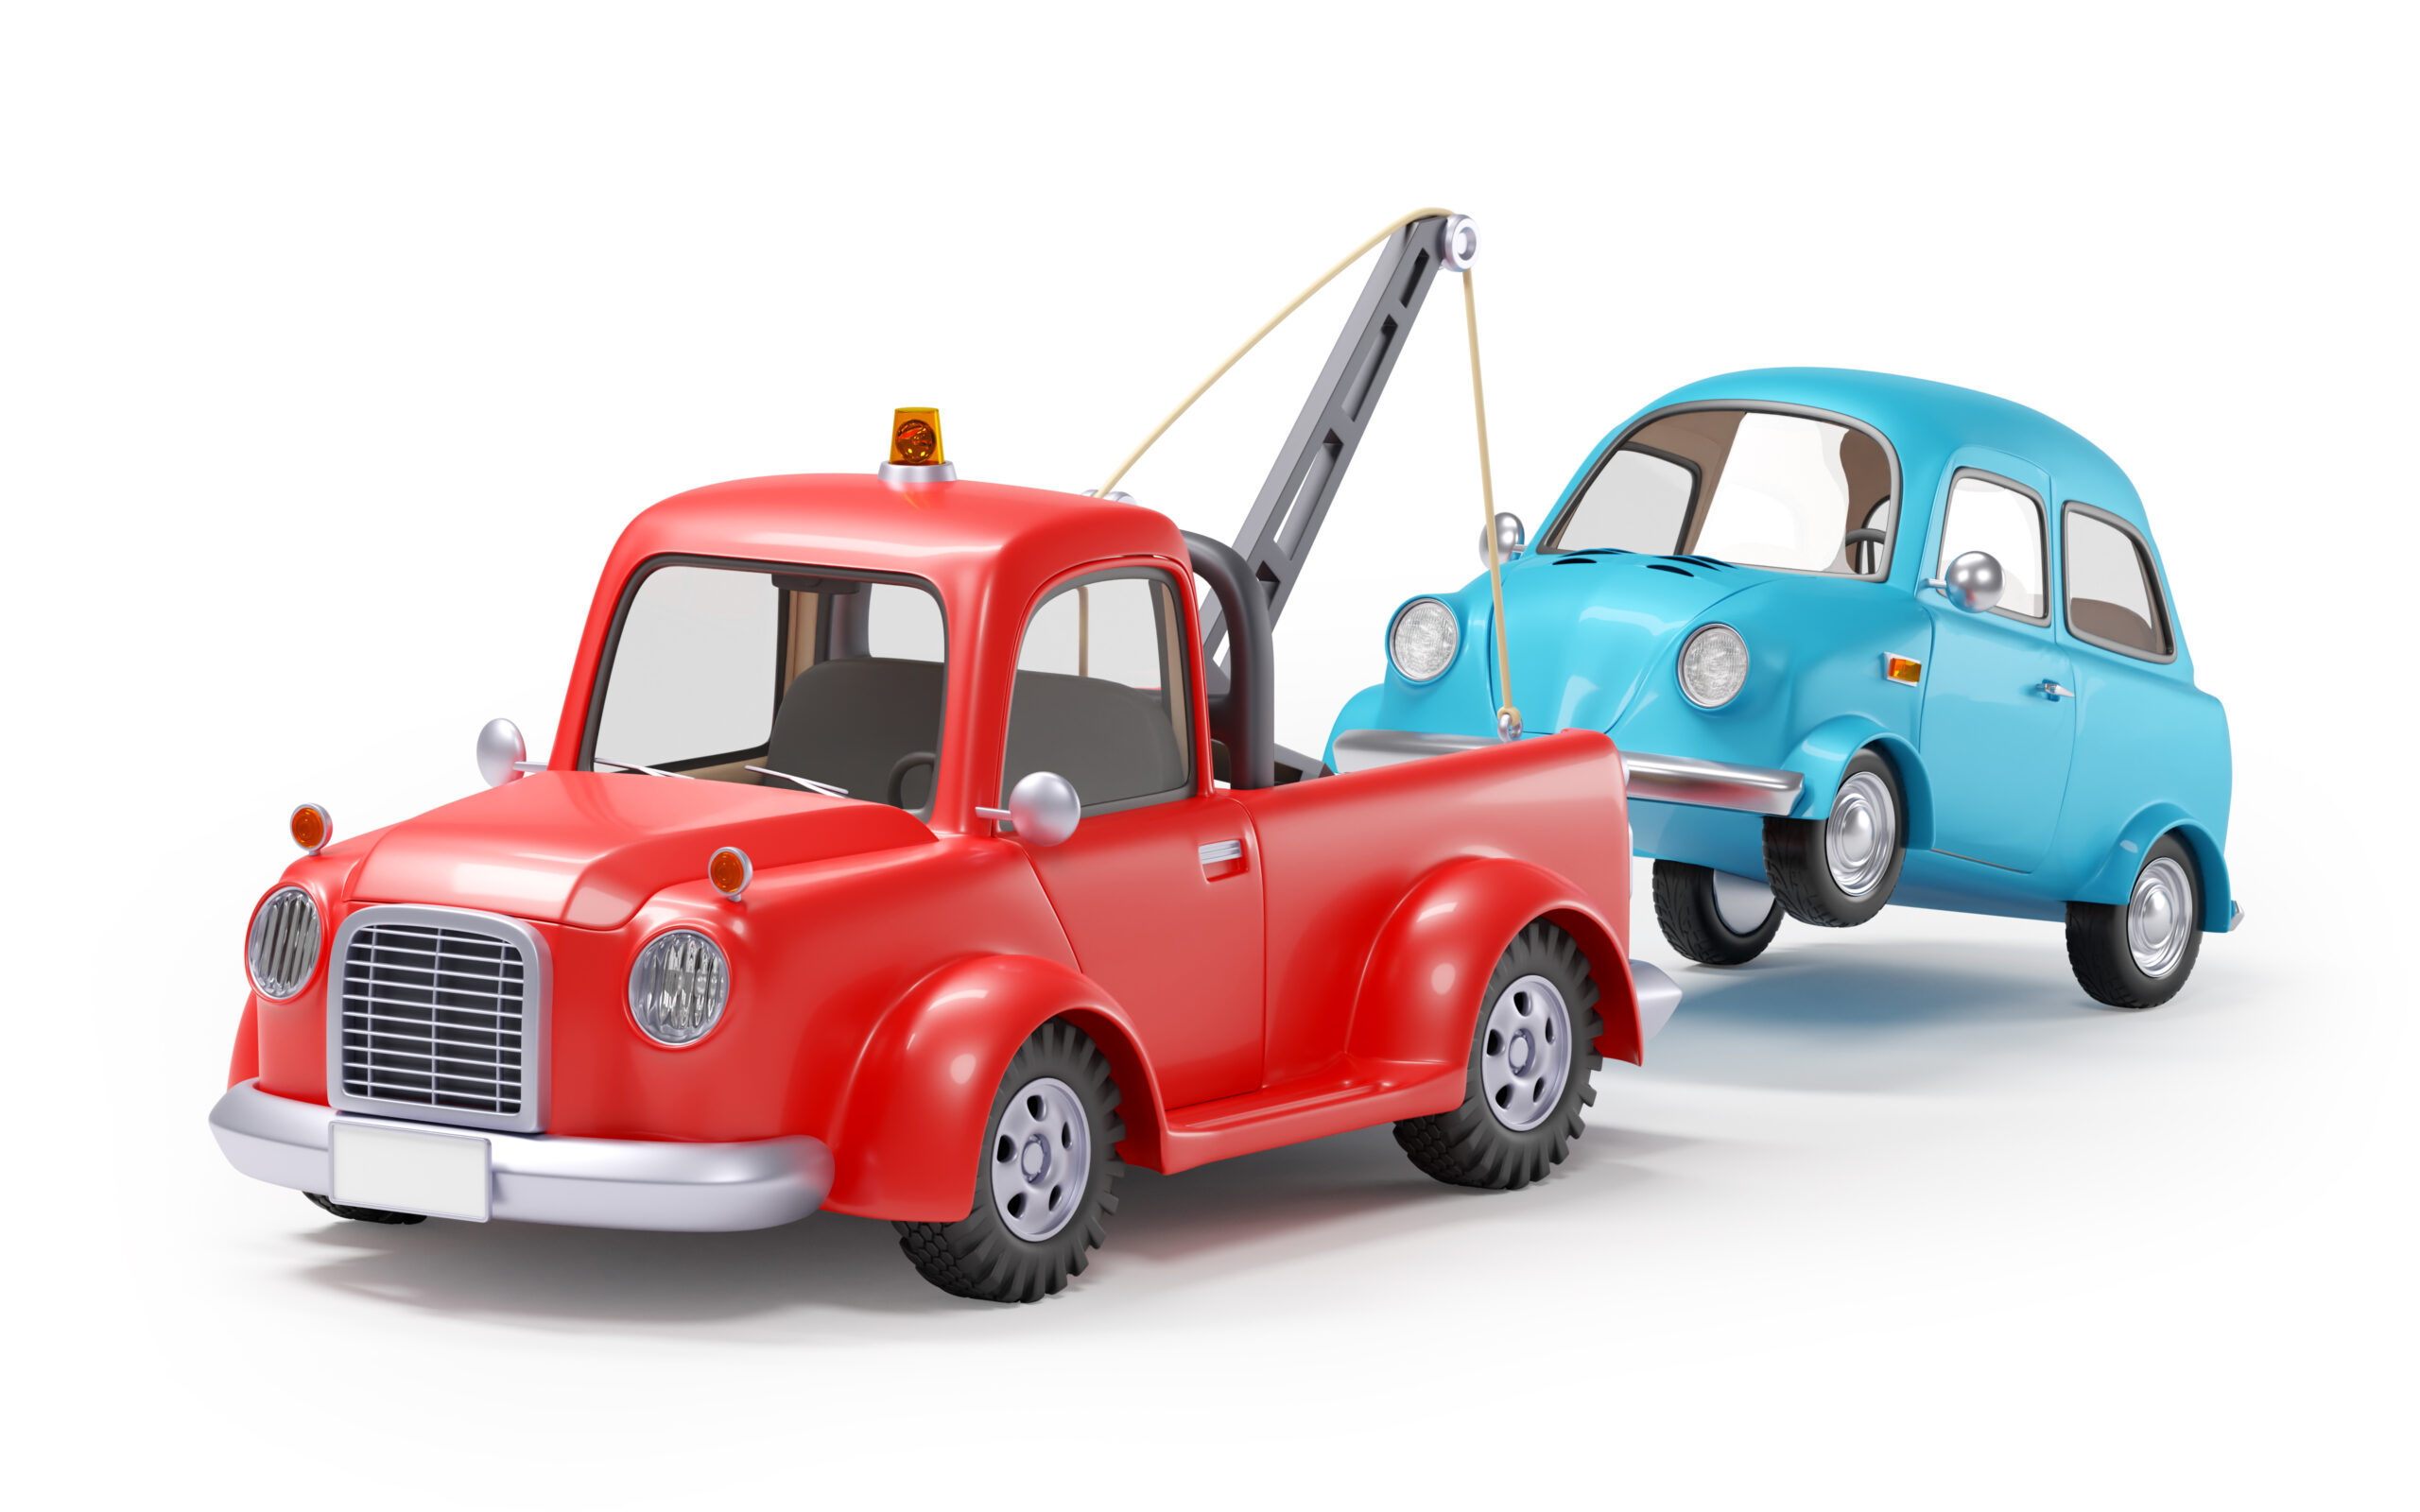 Old cartoon tow truck with car on white background. 3d illustration.